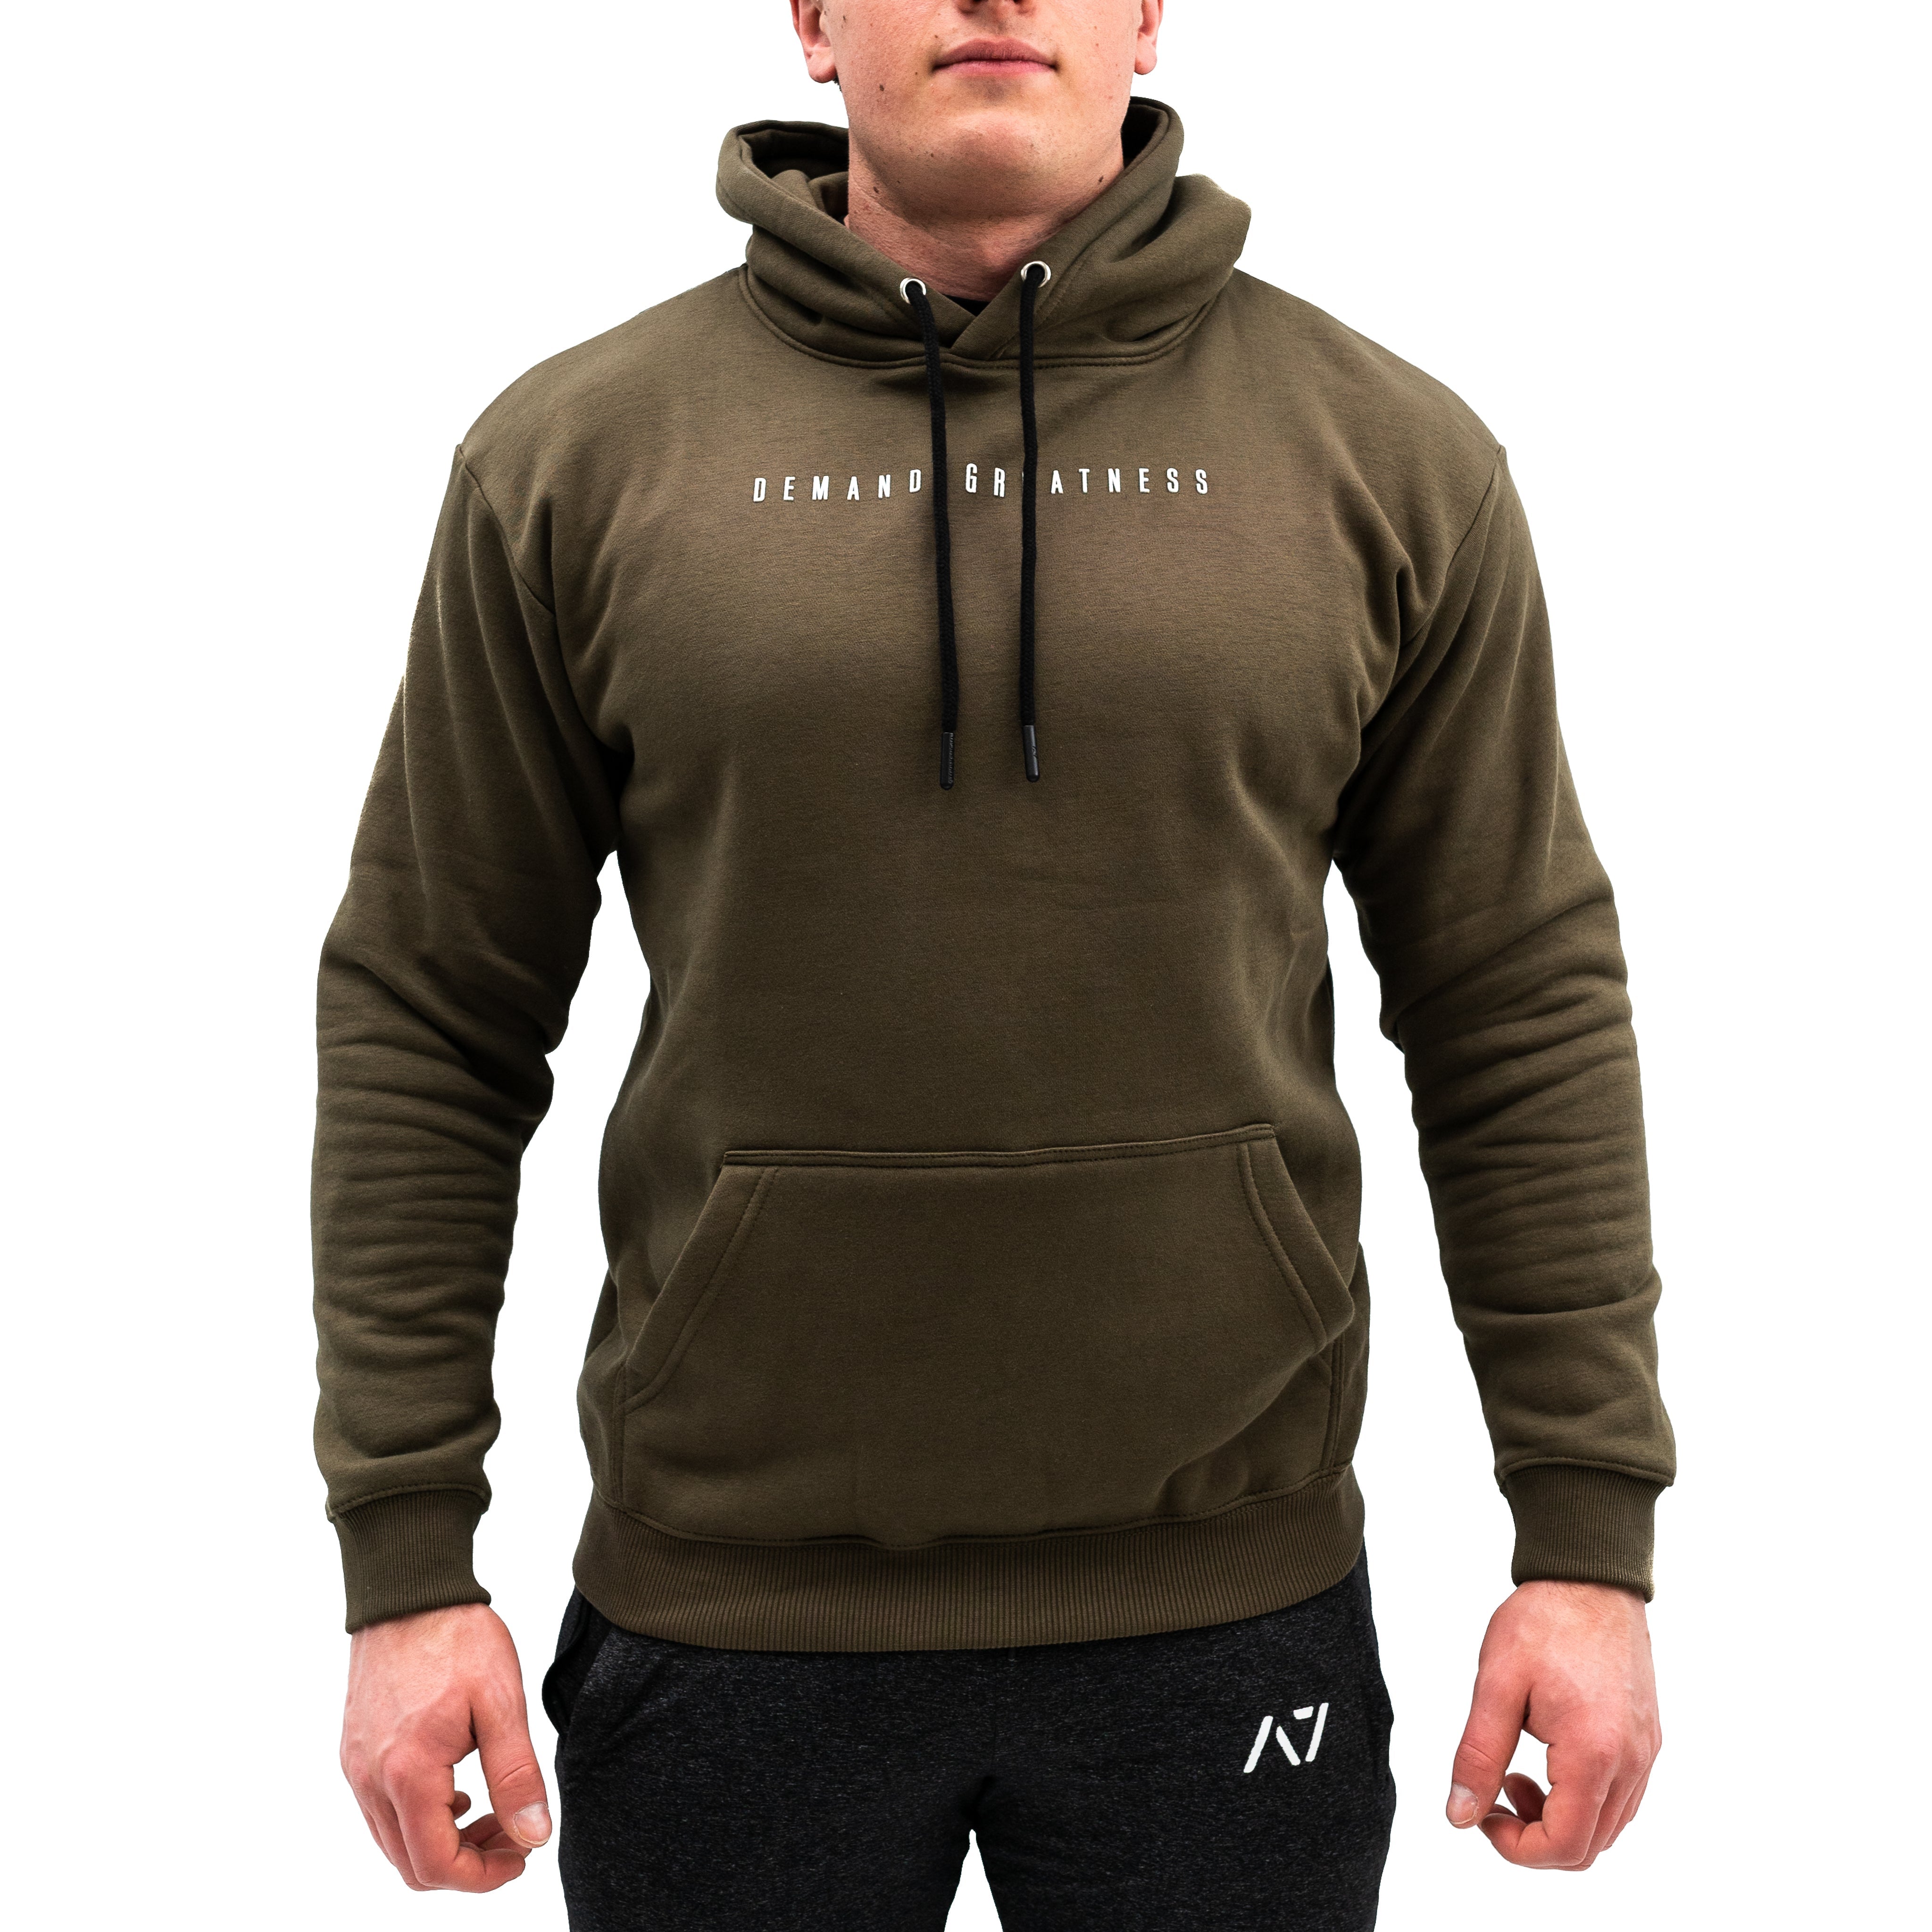 Mantra is a bar grip hoodie great for casual wear or lifting in the gym. Purchase Mantra bar grip hoodie from A7 UK. Purchase Mantra bar grip in Europe from A7 Europe. No more chalk and no more sliding. Mantra is our newest design on our bar grip hoodie. Demand Greatness on the front of the hoodie with bar grip on the back in a military colourway! A7UK supplies the best Powerlifting apparel for all workouts. Available in UK and Europe including France, Italy, Germany, the Netherlands, Sweden and Poland.